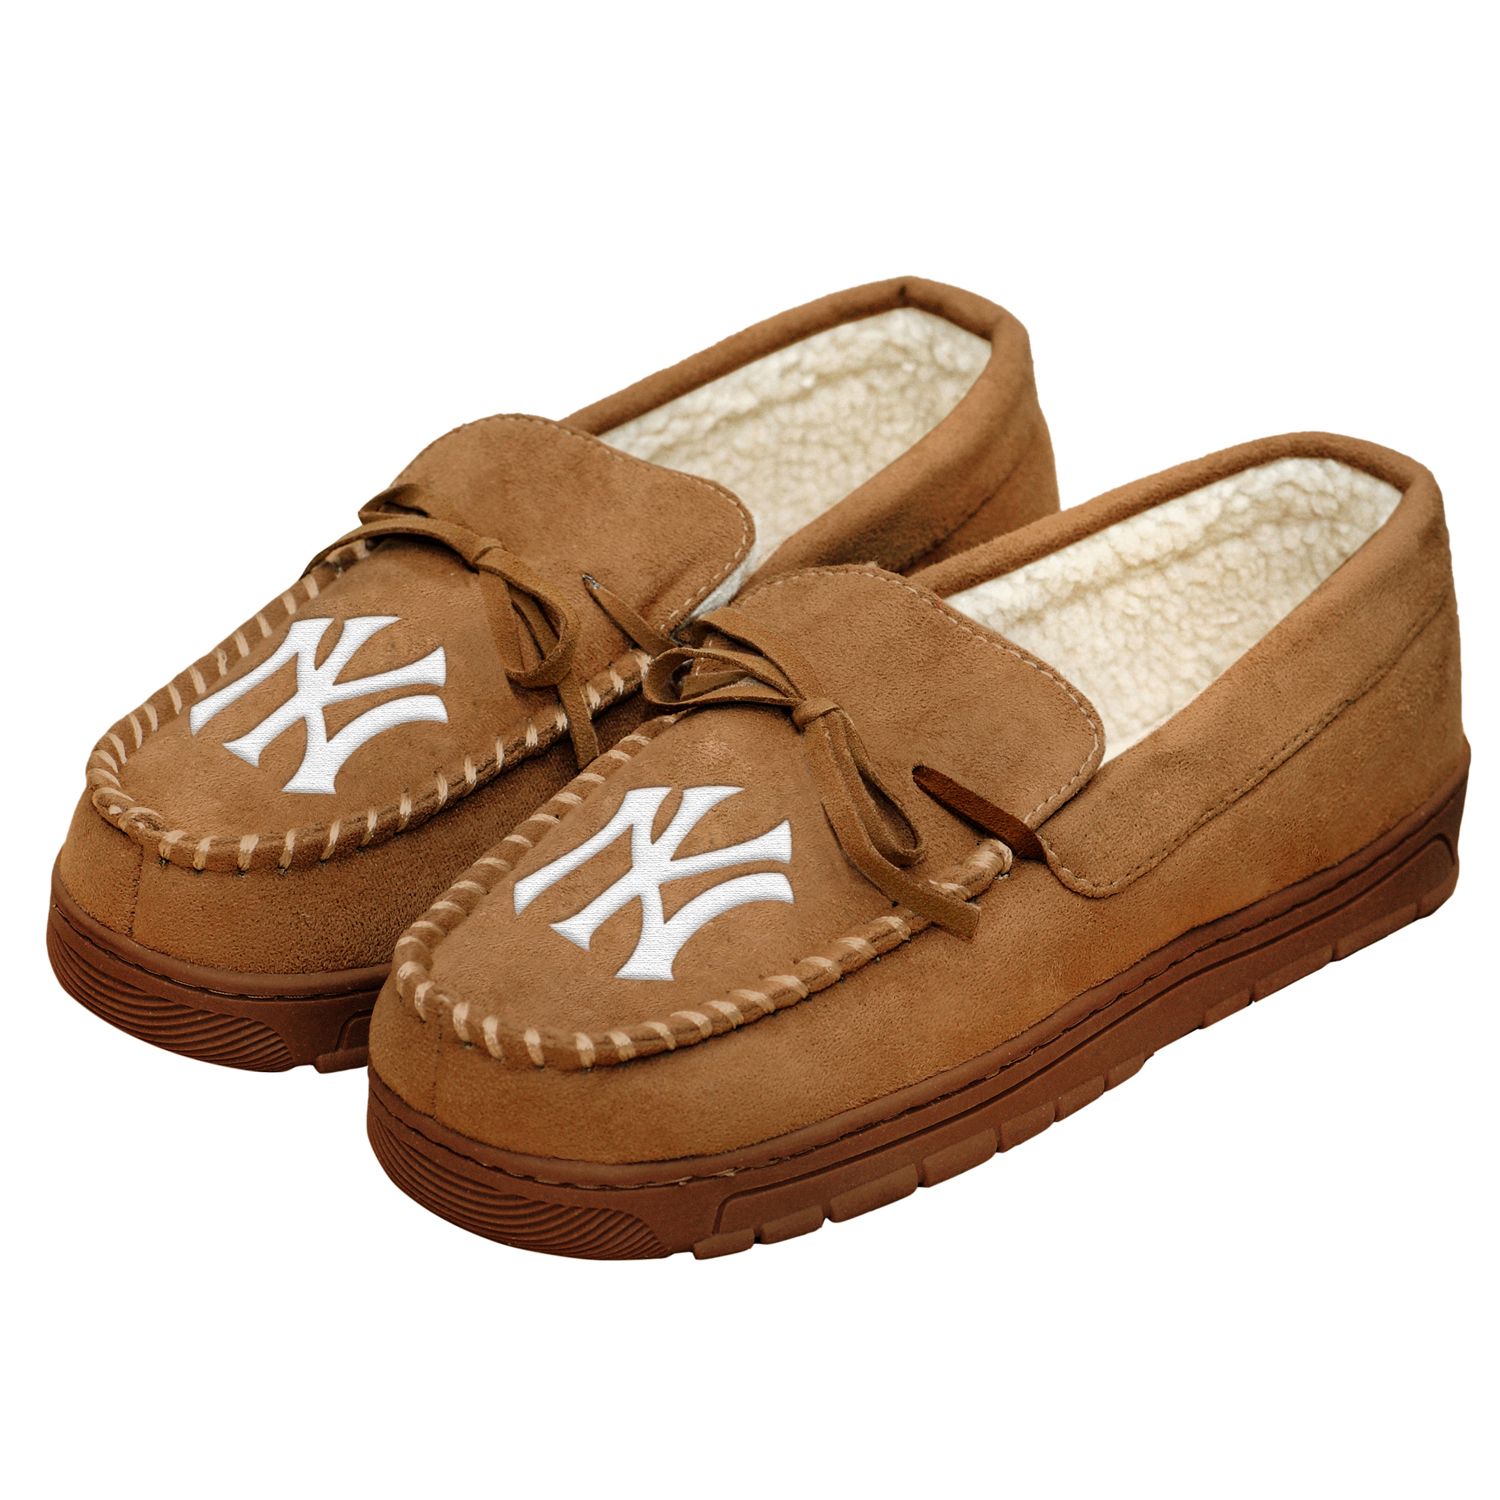 yankee moccasin slippers